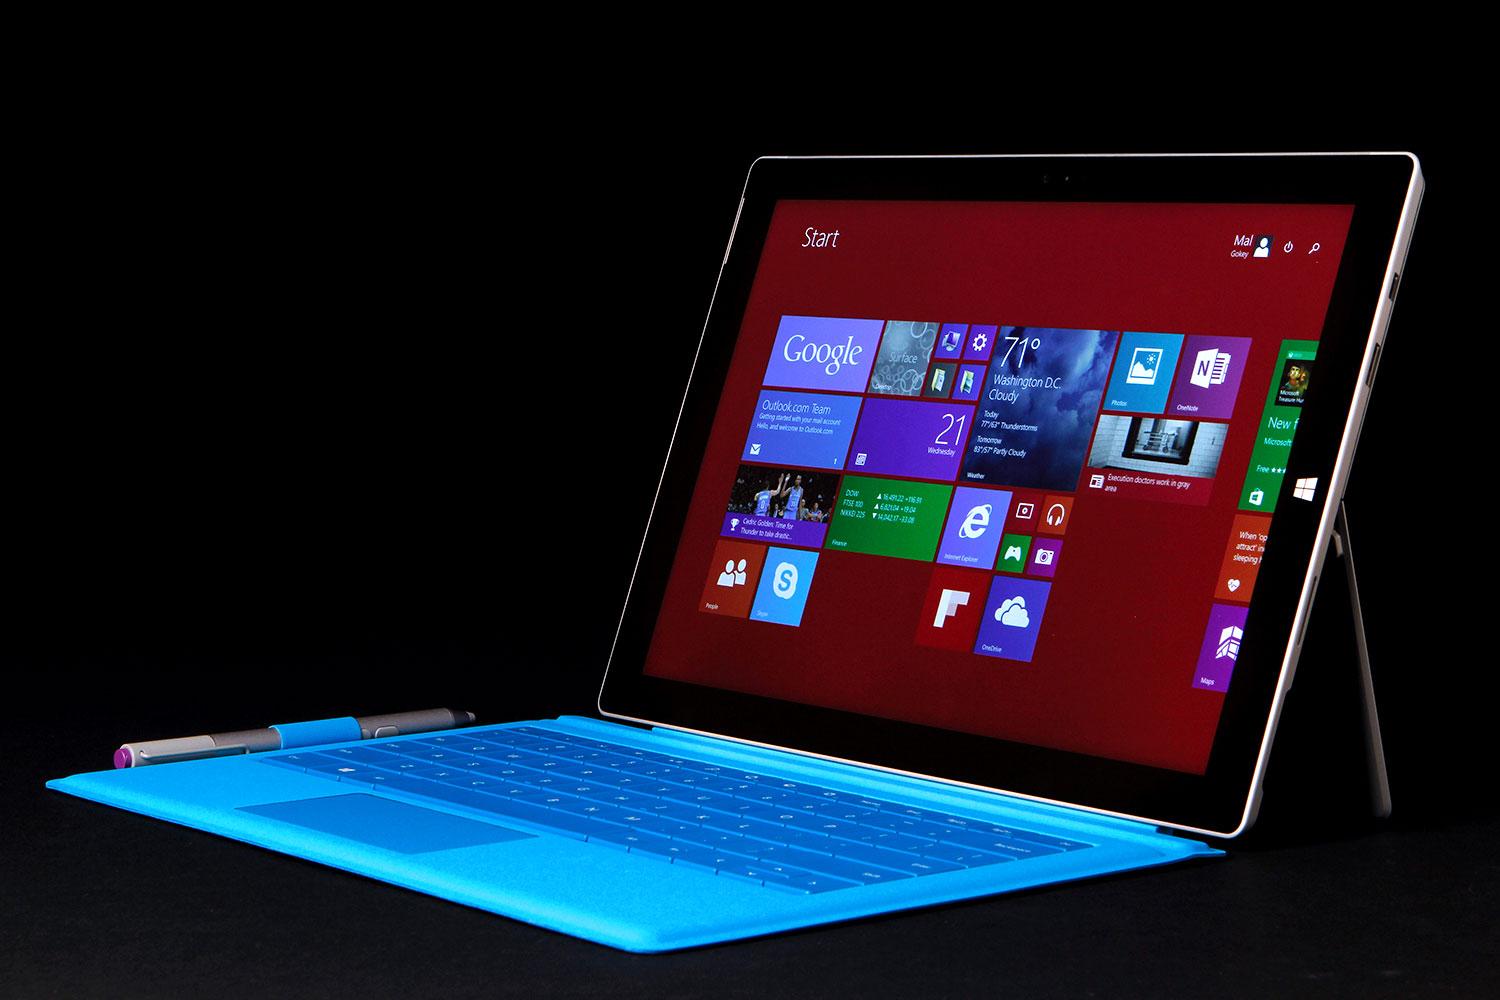 Microsoft Surface Pro 3 Review: 8 Good Things and 8 Bad Things